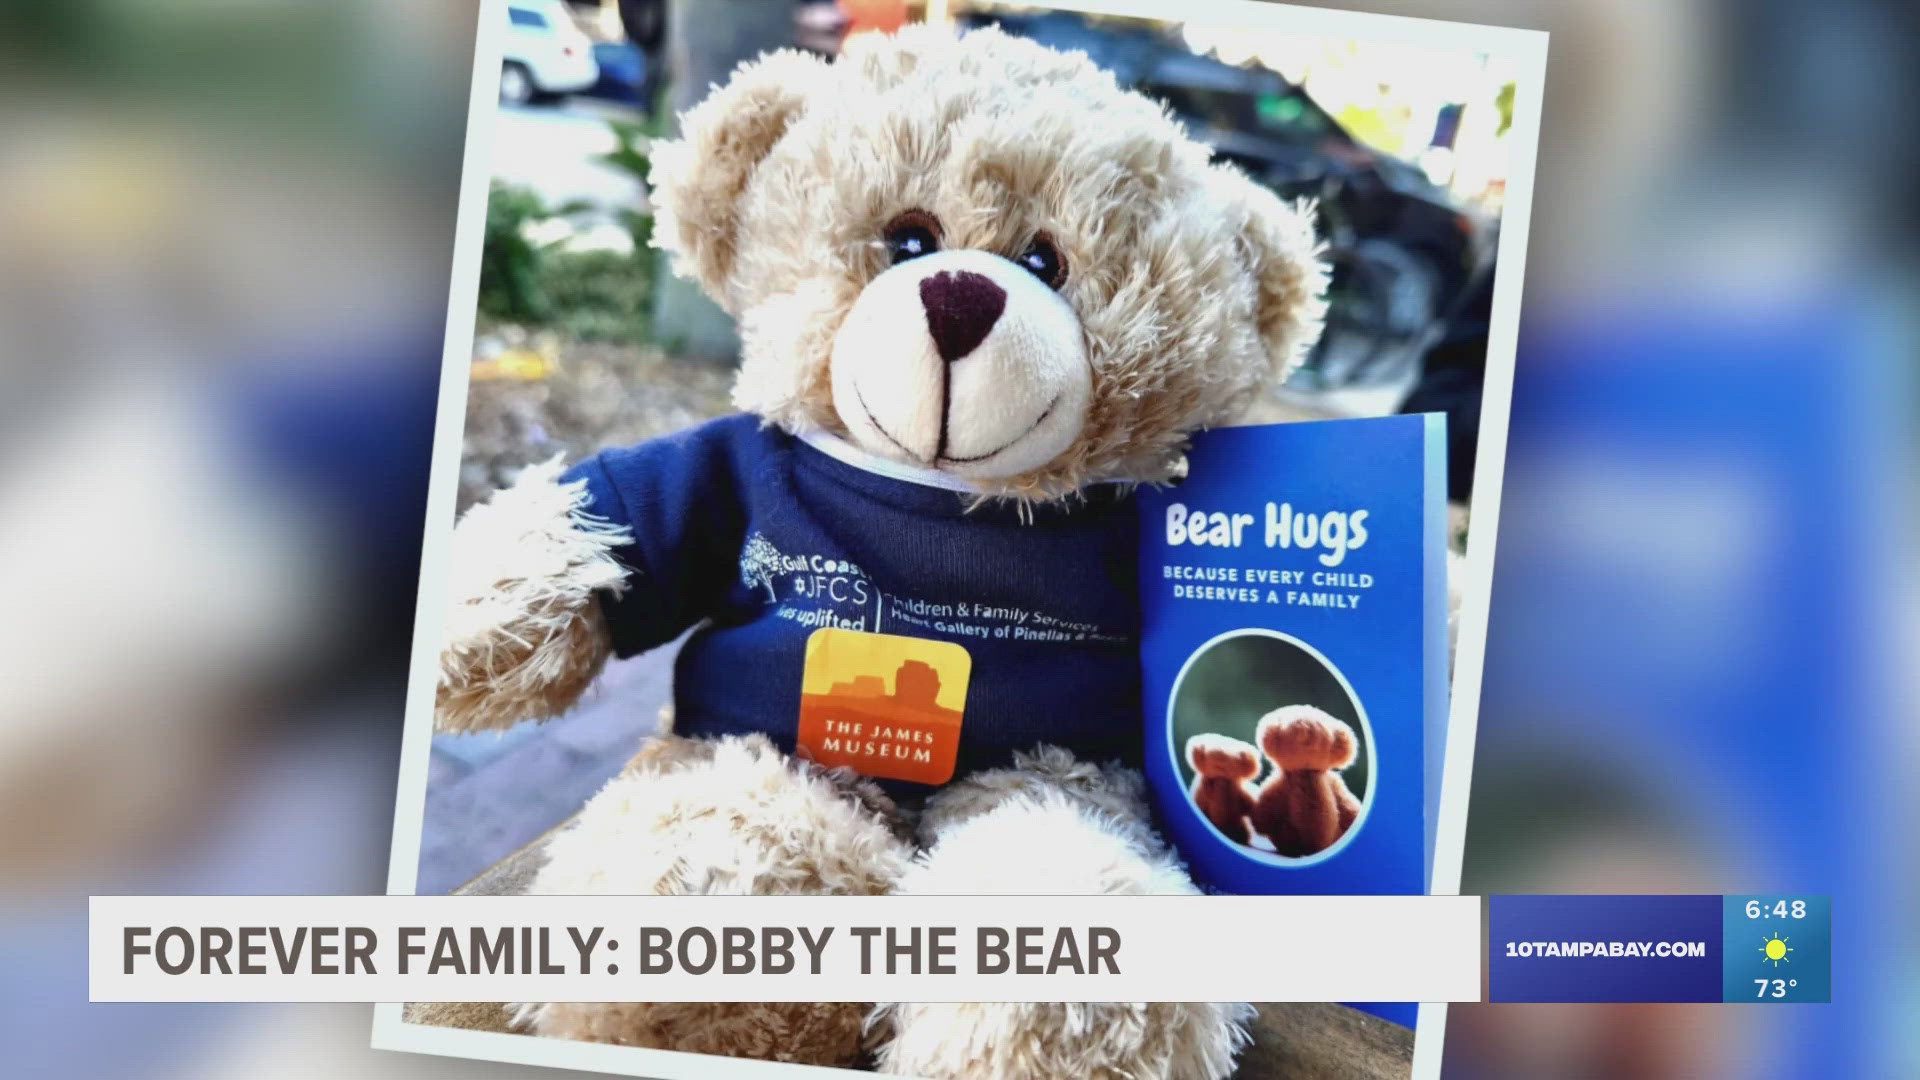 Bobby the Bear is meant to build awareness about adoption and children in foster care waiting for their forever families.